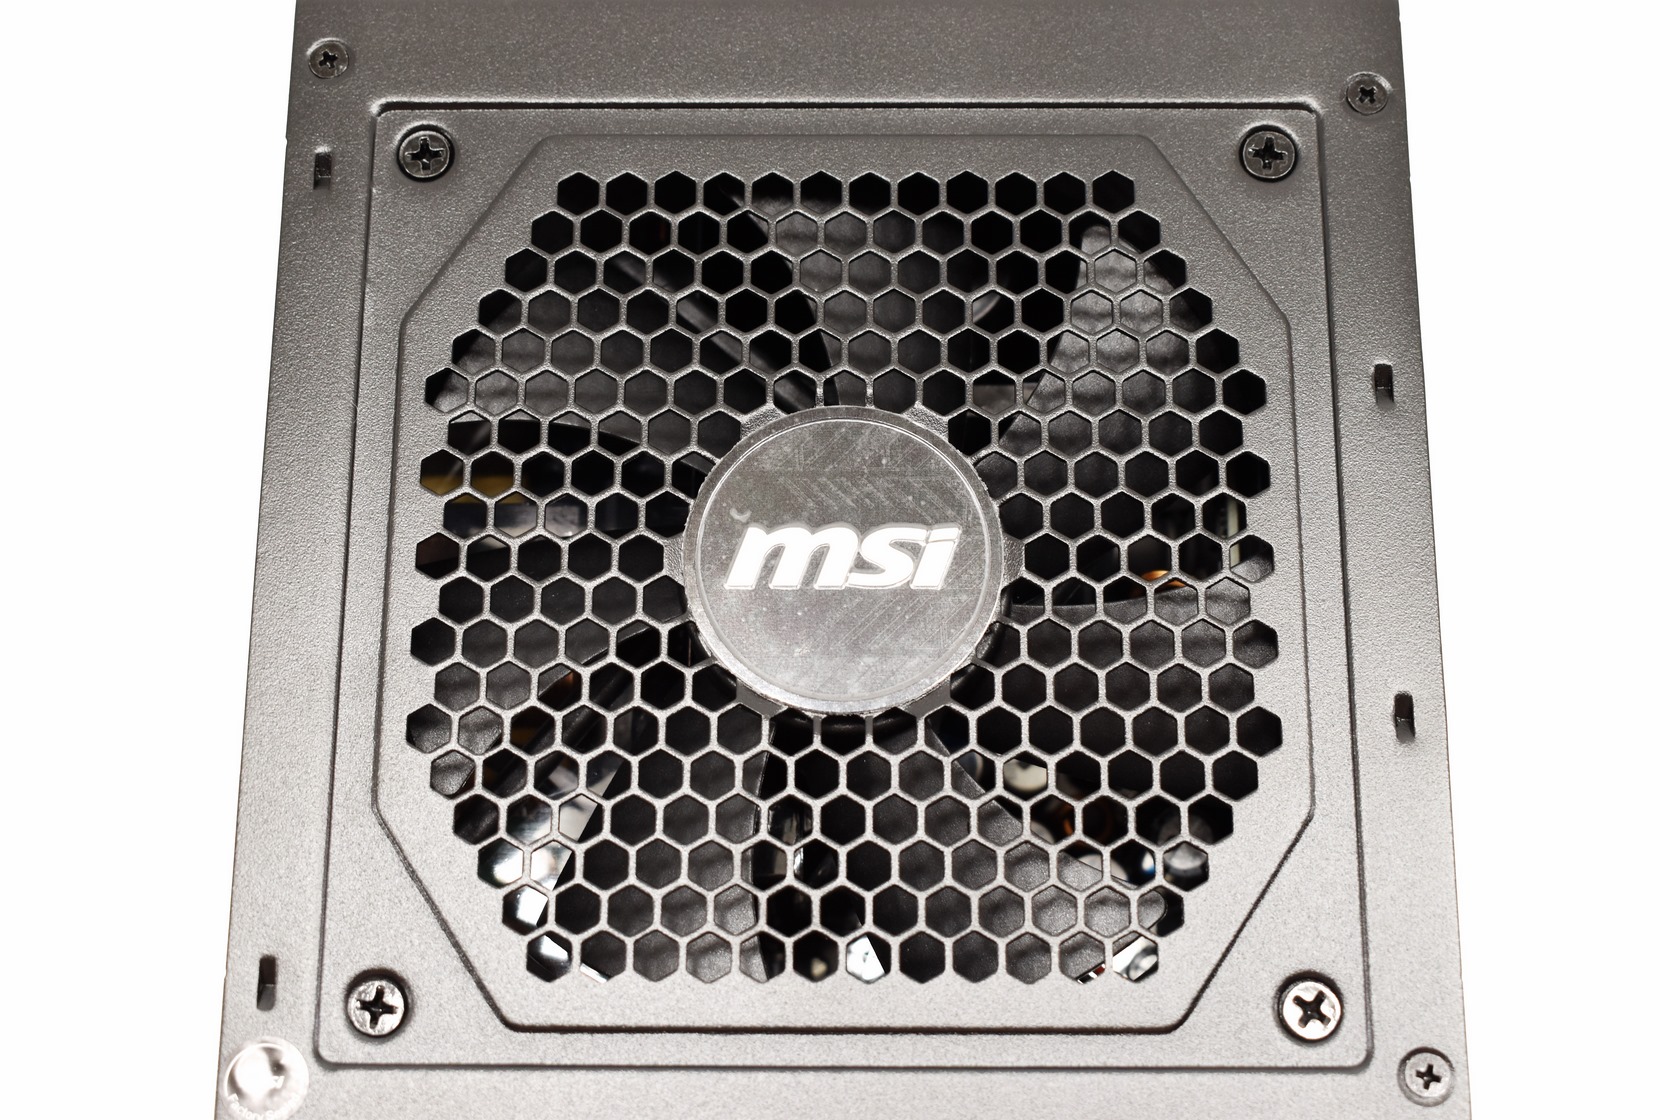 MSI - MAG A850GL PCIE 5.0, 80 GOLD Fully Modular Gaming PSU, 12VHPWR Cable,  ATX 3.0 Compatible, 850W Power Supply 